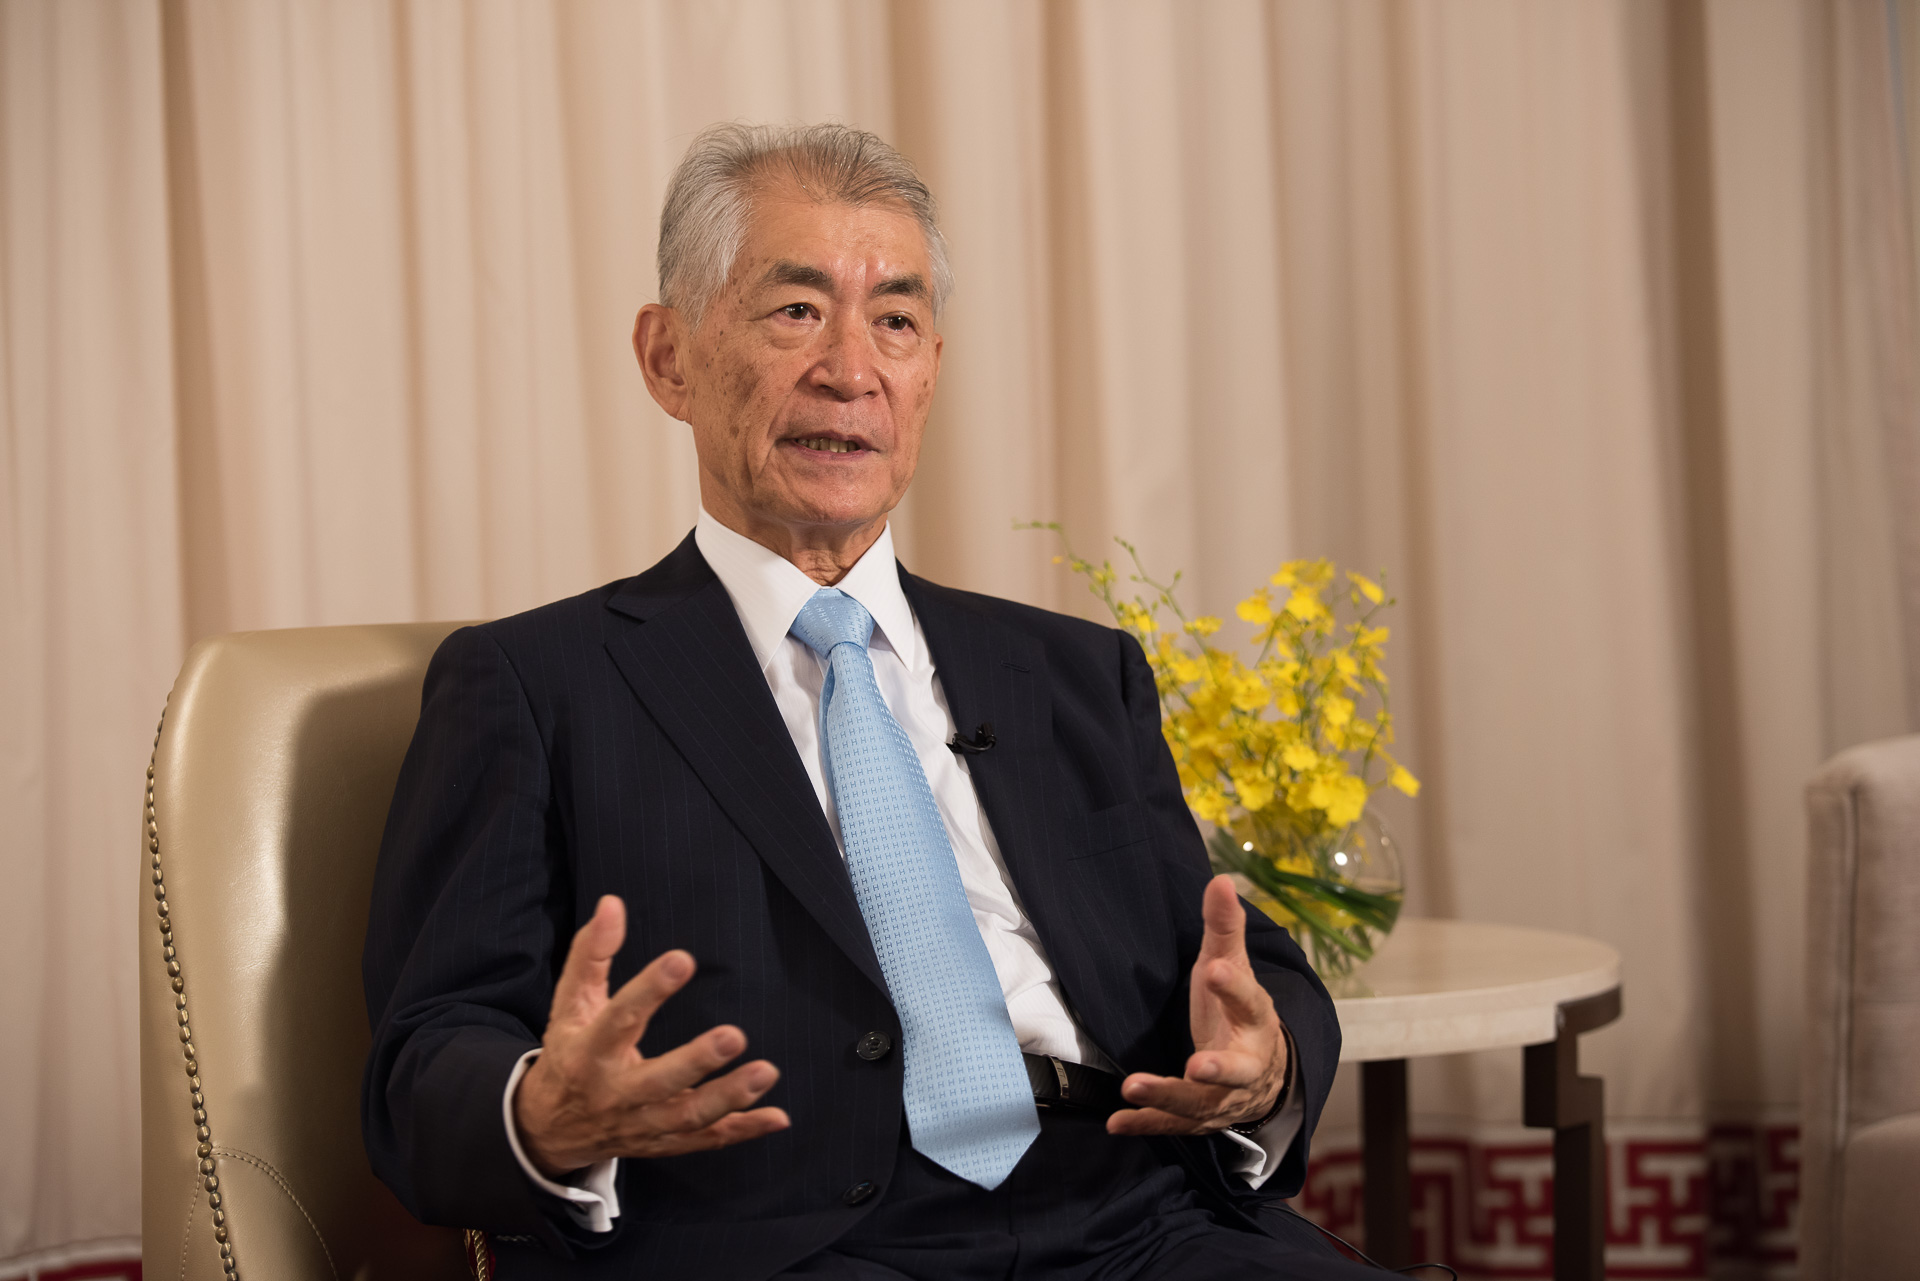 Nobel Prize and Tang Prize laureate Tasuku Honjo emphasizes the need to integrate science into policy making (photo courtesy of Tang Prize Foundation)